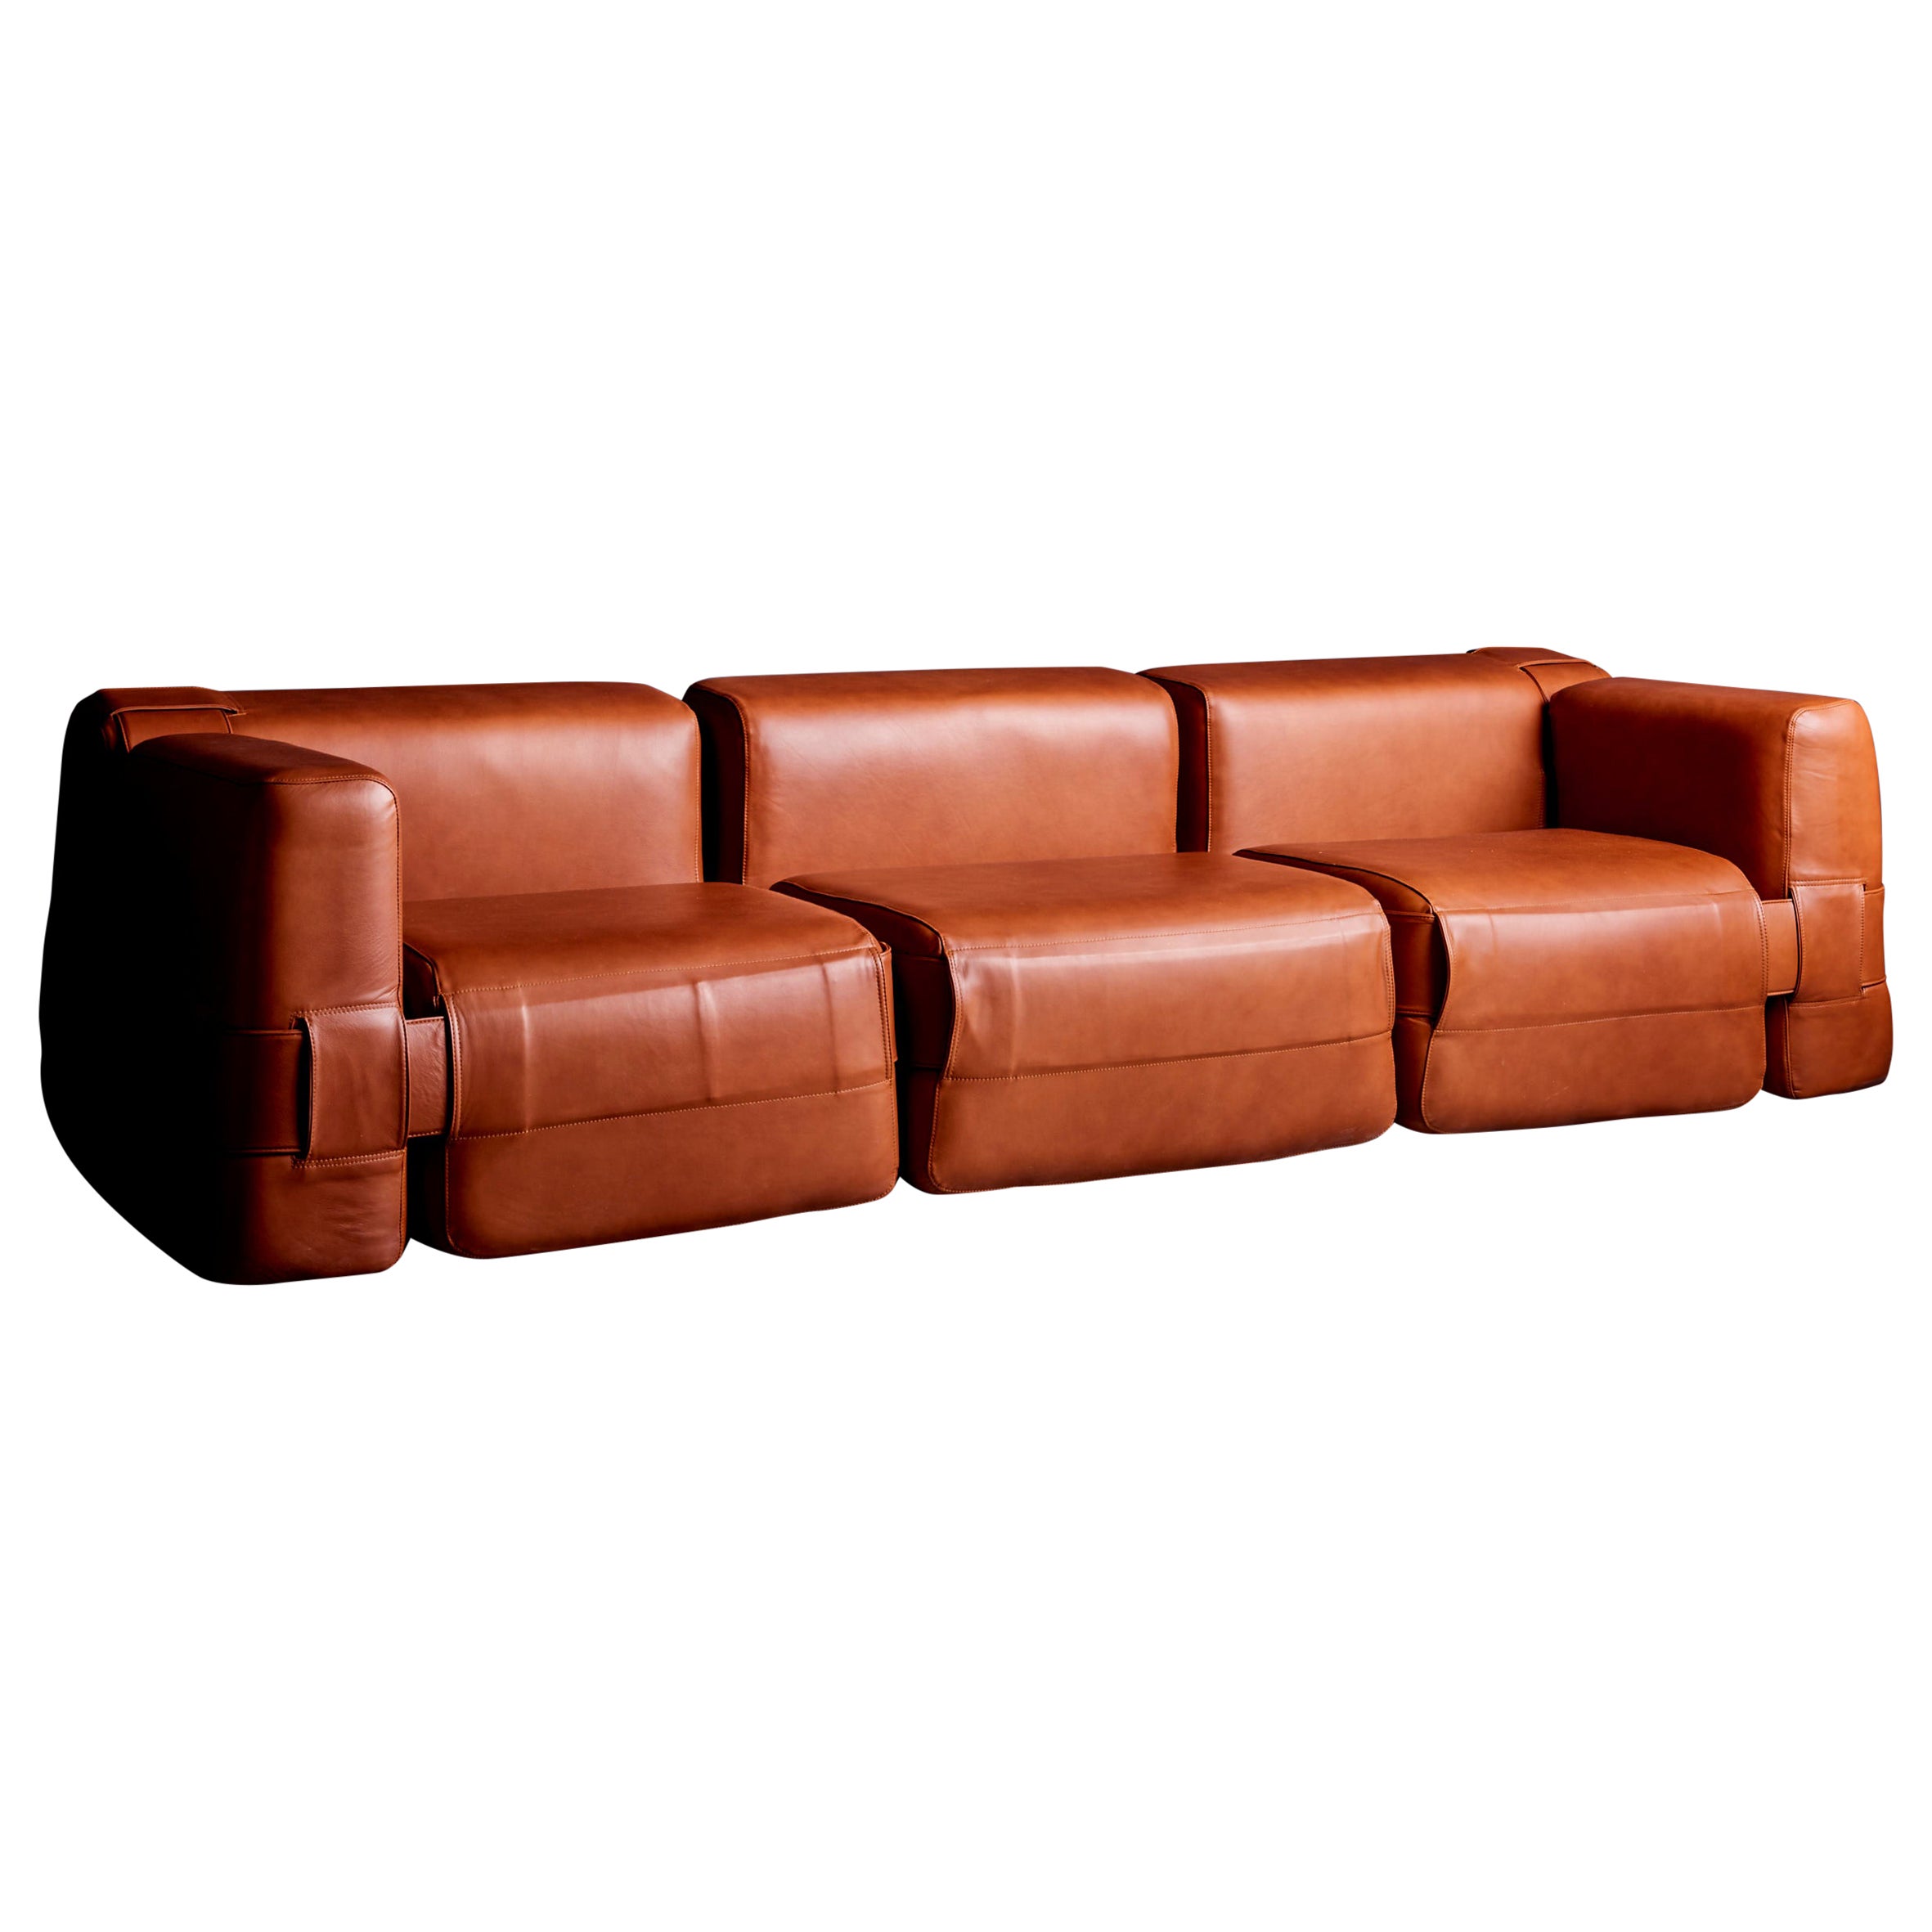 Reupholstered 932 3-seater sofa by Mario Bellini for Cassina, Italy - 1960s For Sale